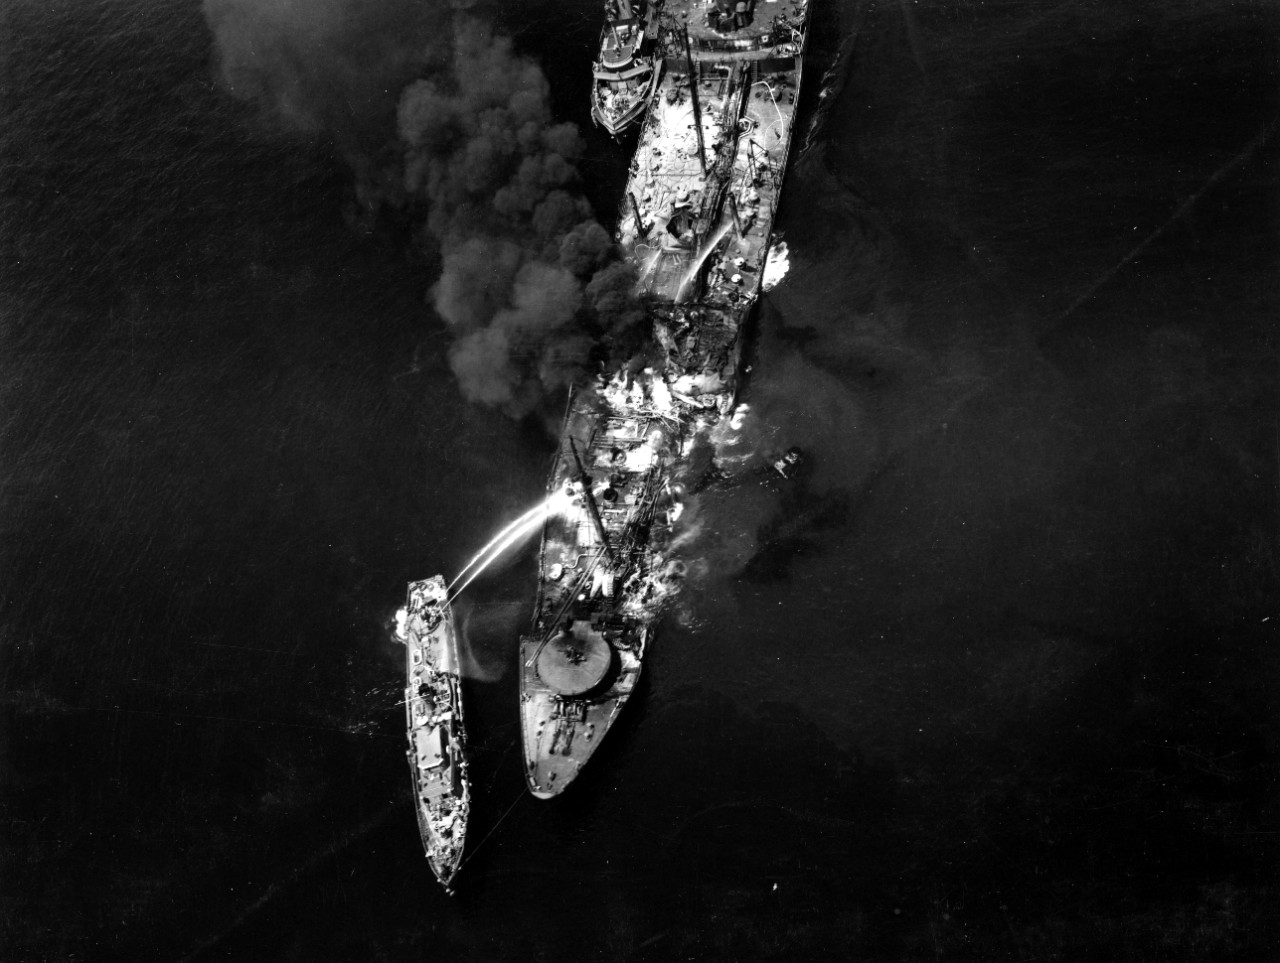 YP-261, a line to Montana’s bow, fights the last of the fires on board the burning tanker in a view probably taken on 2 June 1943, when the firefighters finally gained the upper hand. (U.S. Navy Photograph 80-G-68490, National Archives and Record...